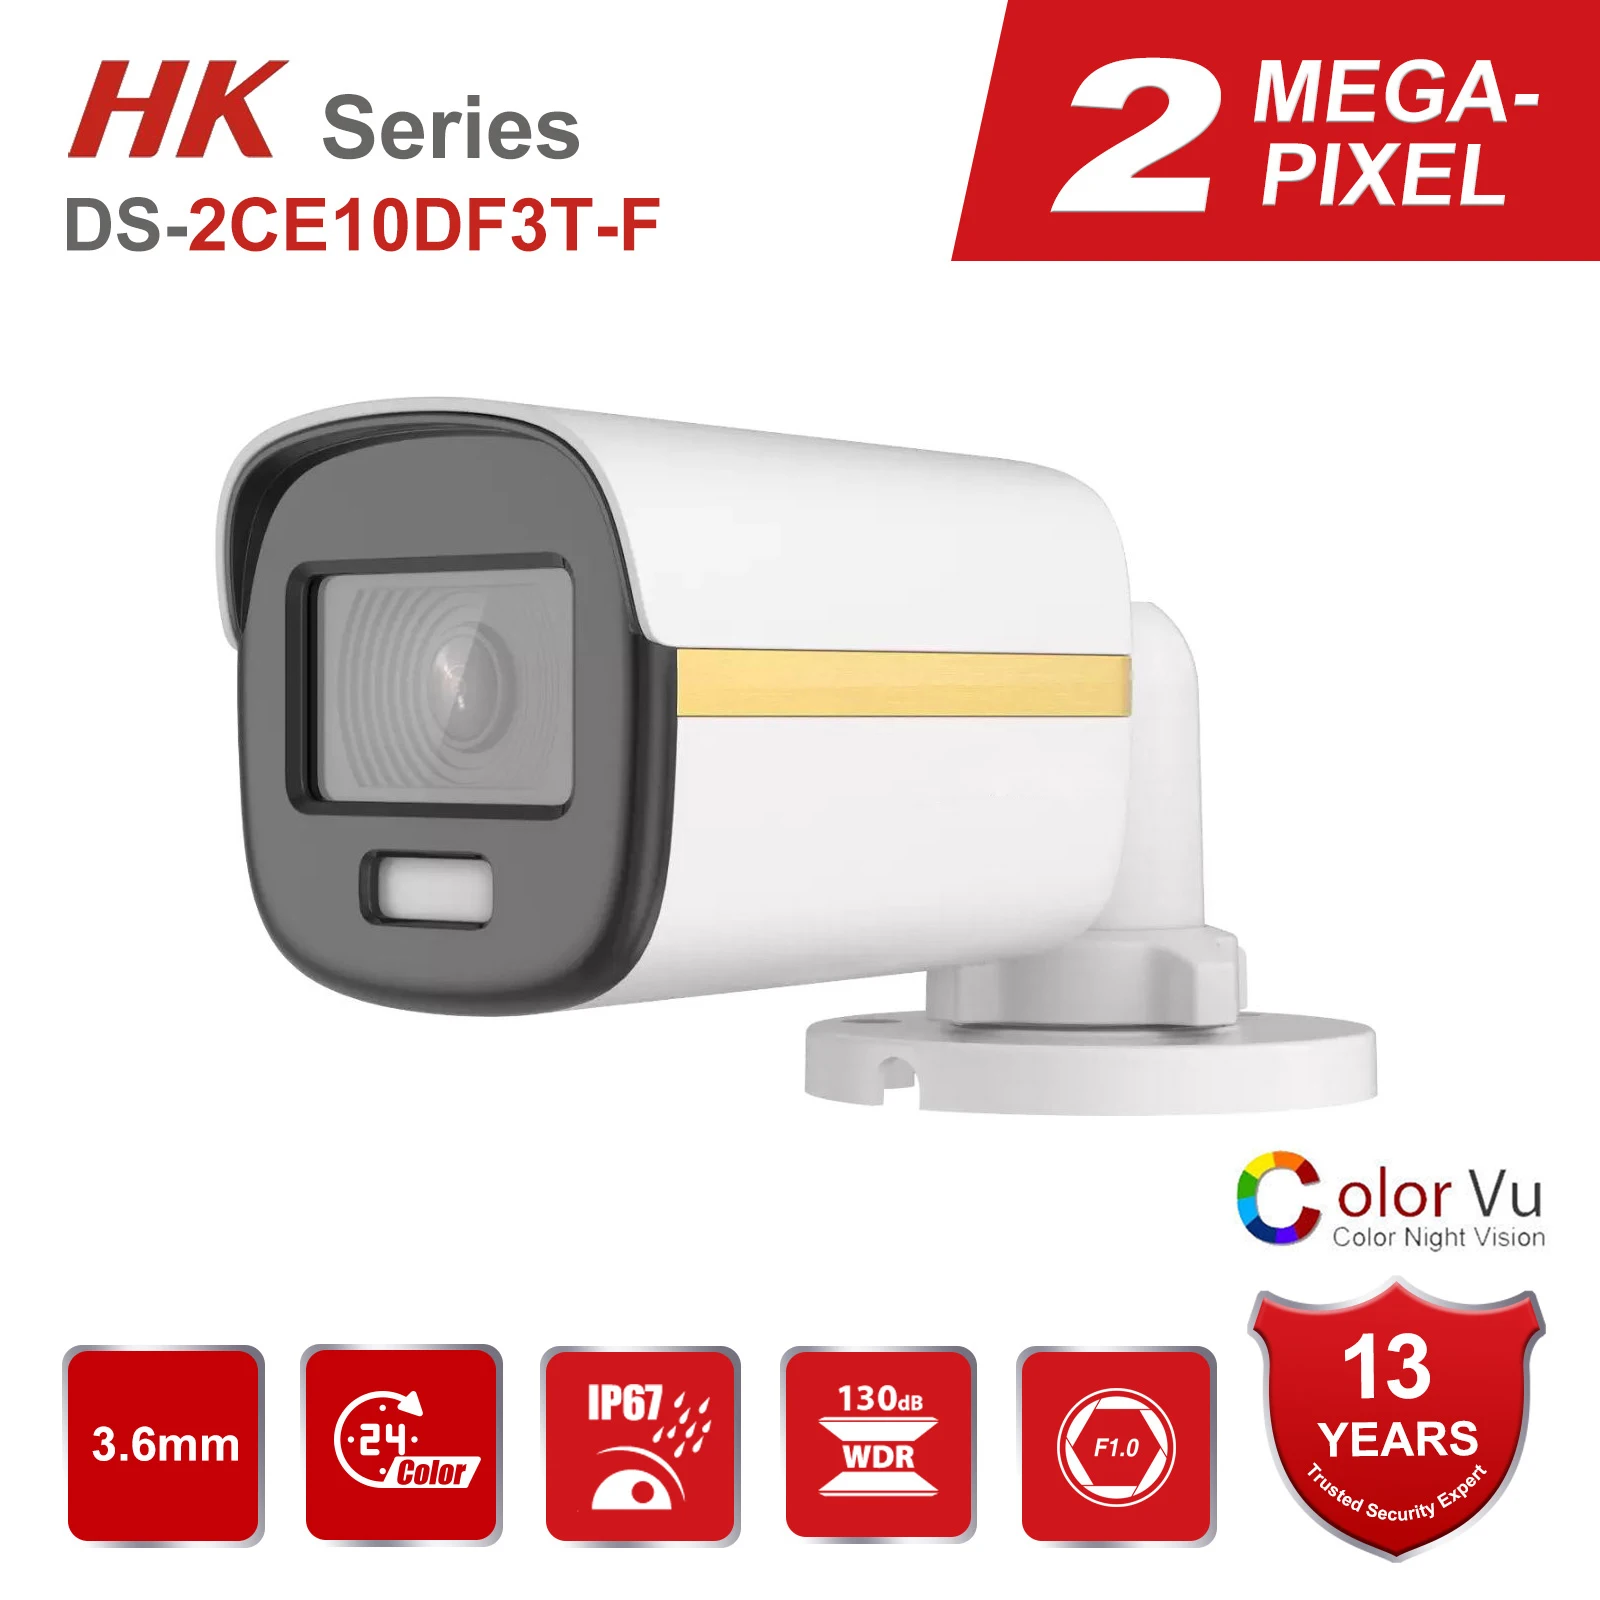 HK Original DS-2CE10DF3T-F 2MP ColorVu Fixed Mini Bullet Camera CCTV Wired Analog Camera  Full Time View Outdoor Security 4in1